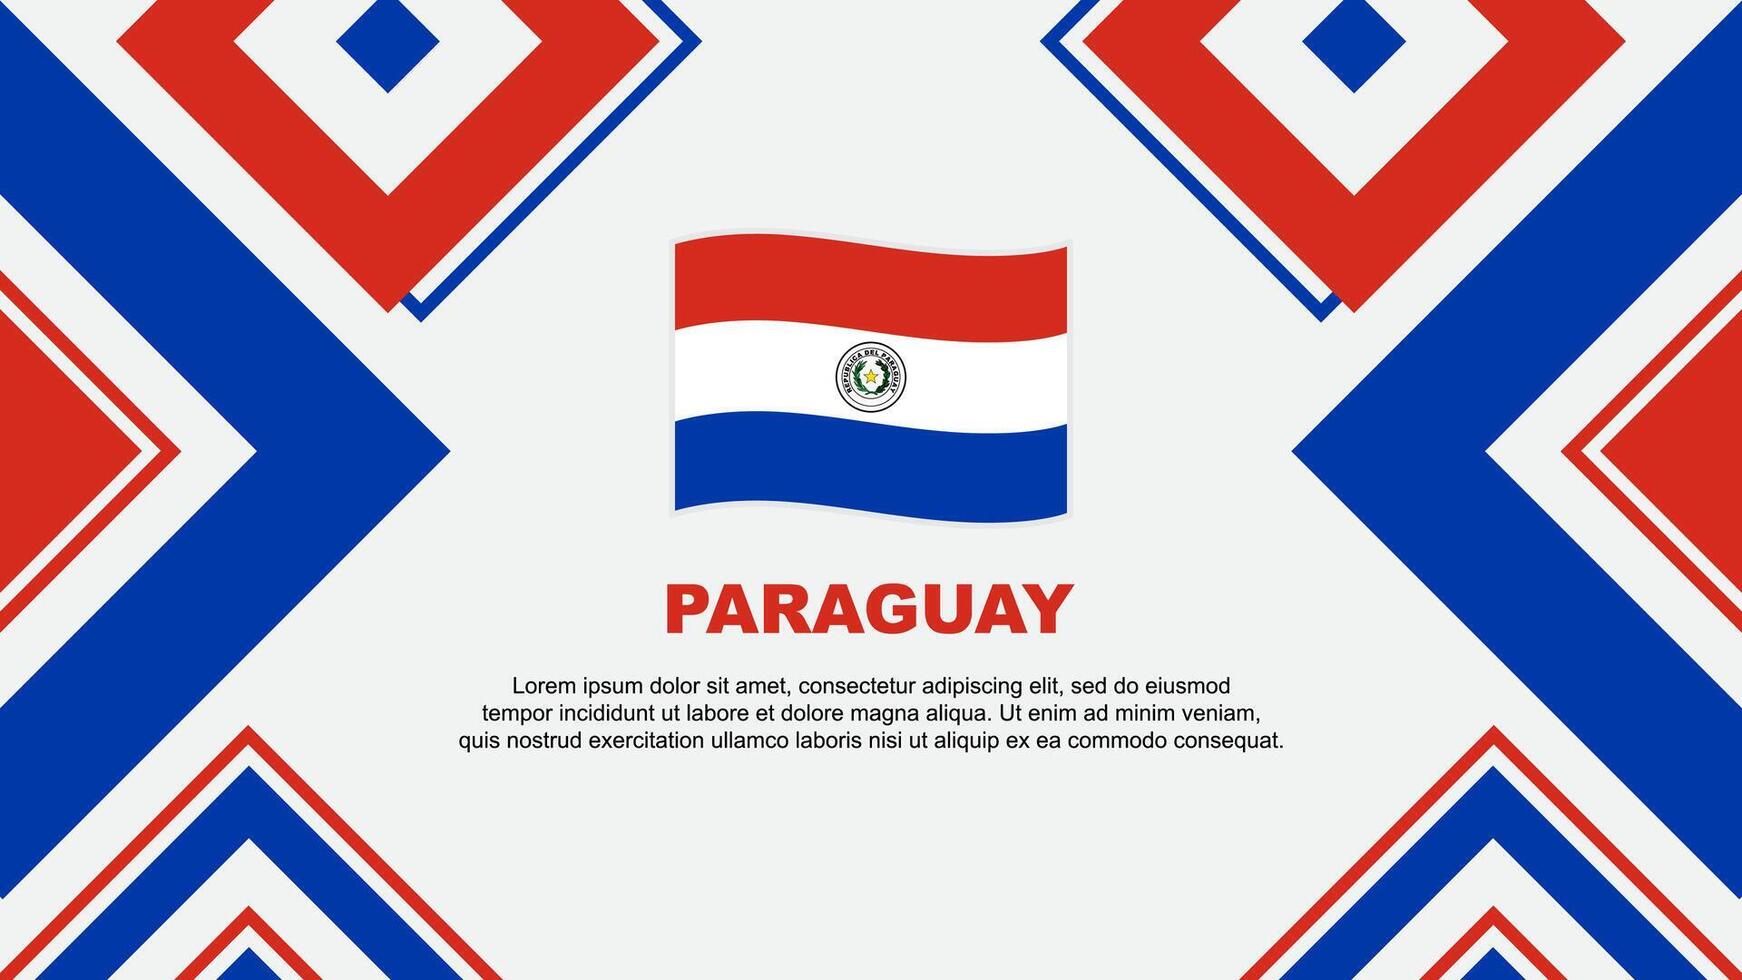 Paraguay Flag Abstract Background Design Template. Paraguay Independence Day Banner Wallpaper Vector Illustration. Paraguay Independence Day